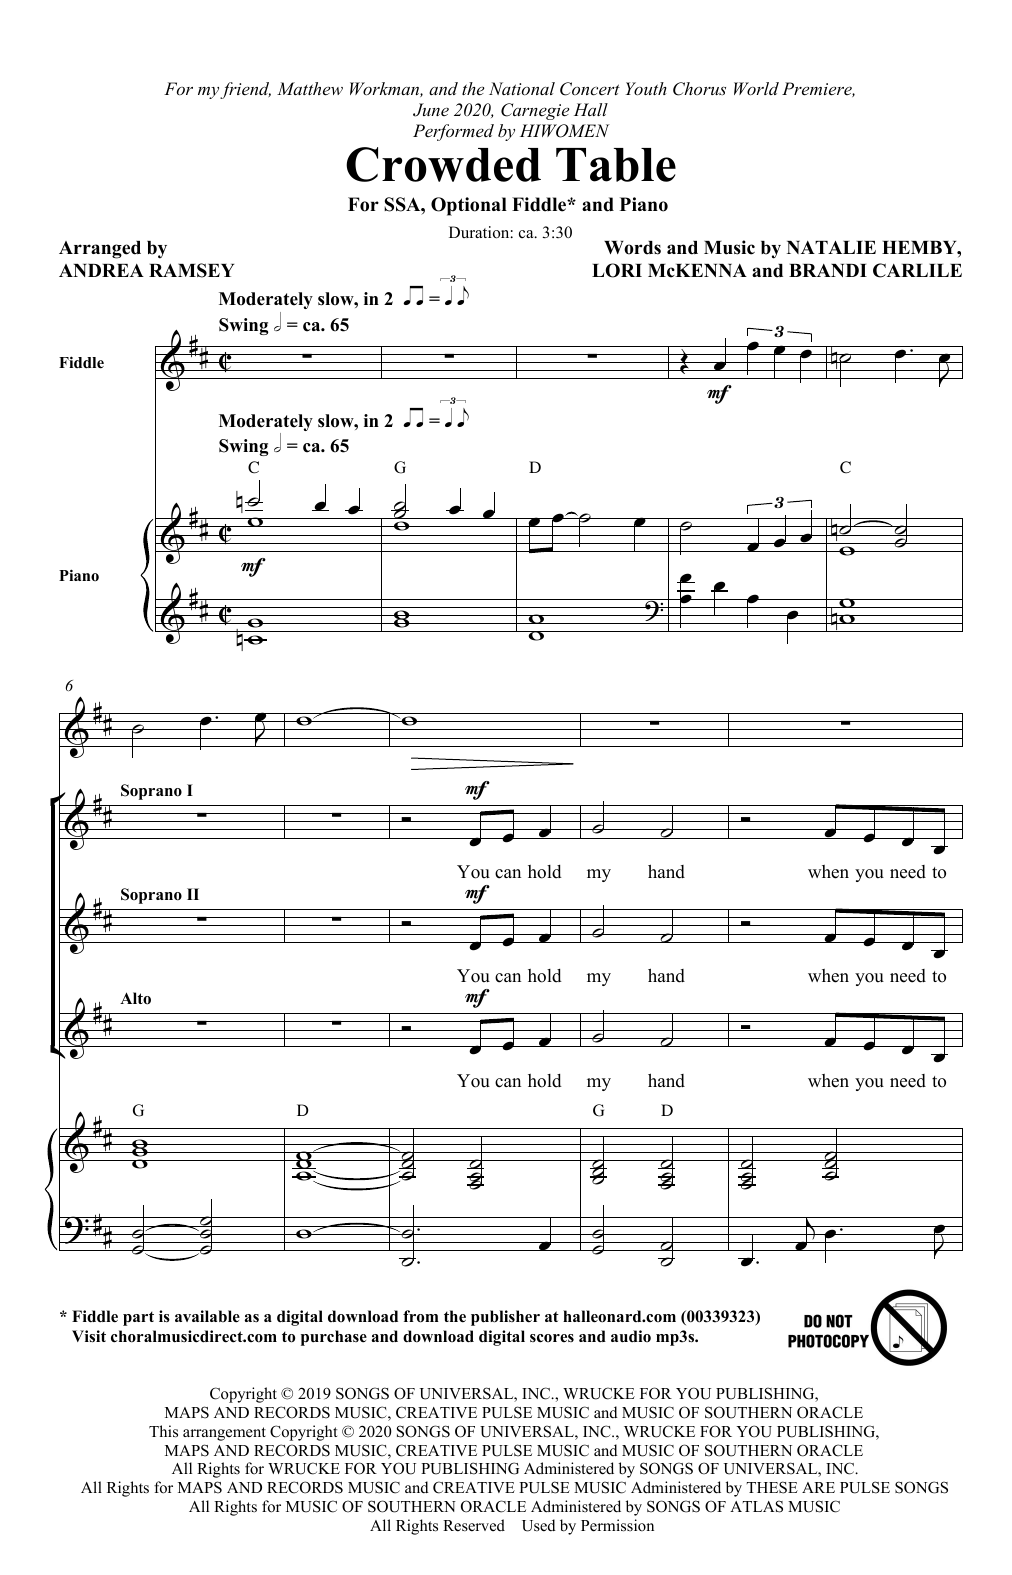 Download The Highwomen Crowded Table (arr. Andrea Ramsey) Sheet Music